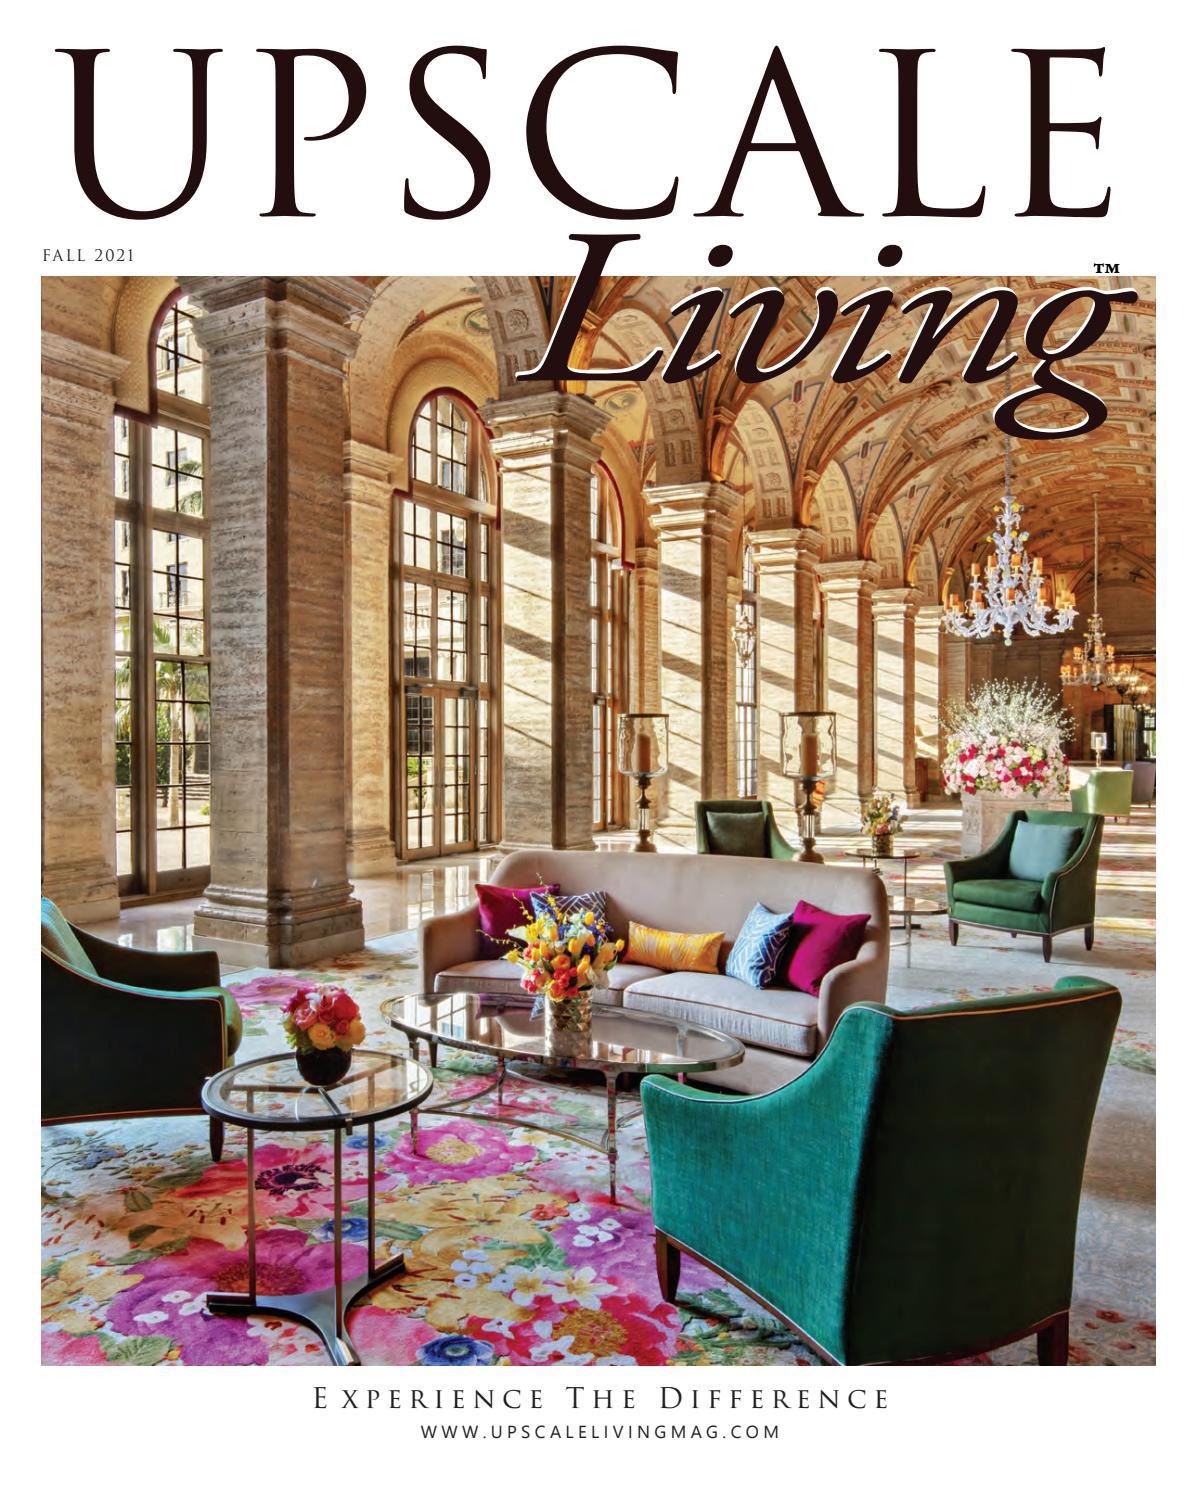 FALL 2021 Issue of Upscale Living